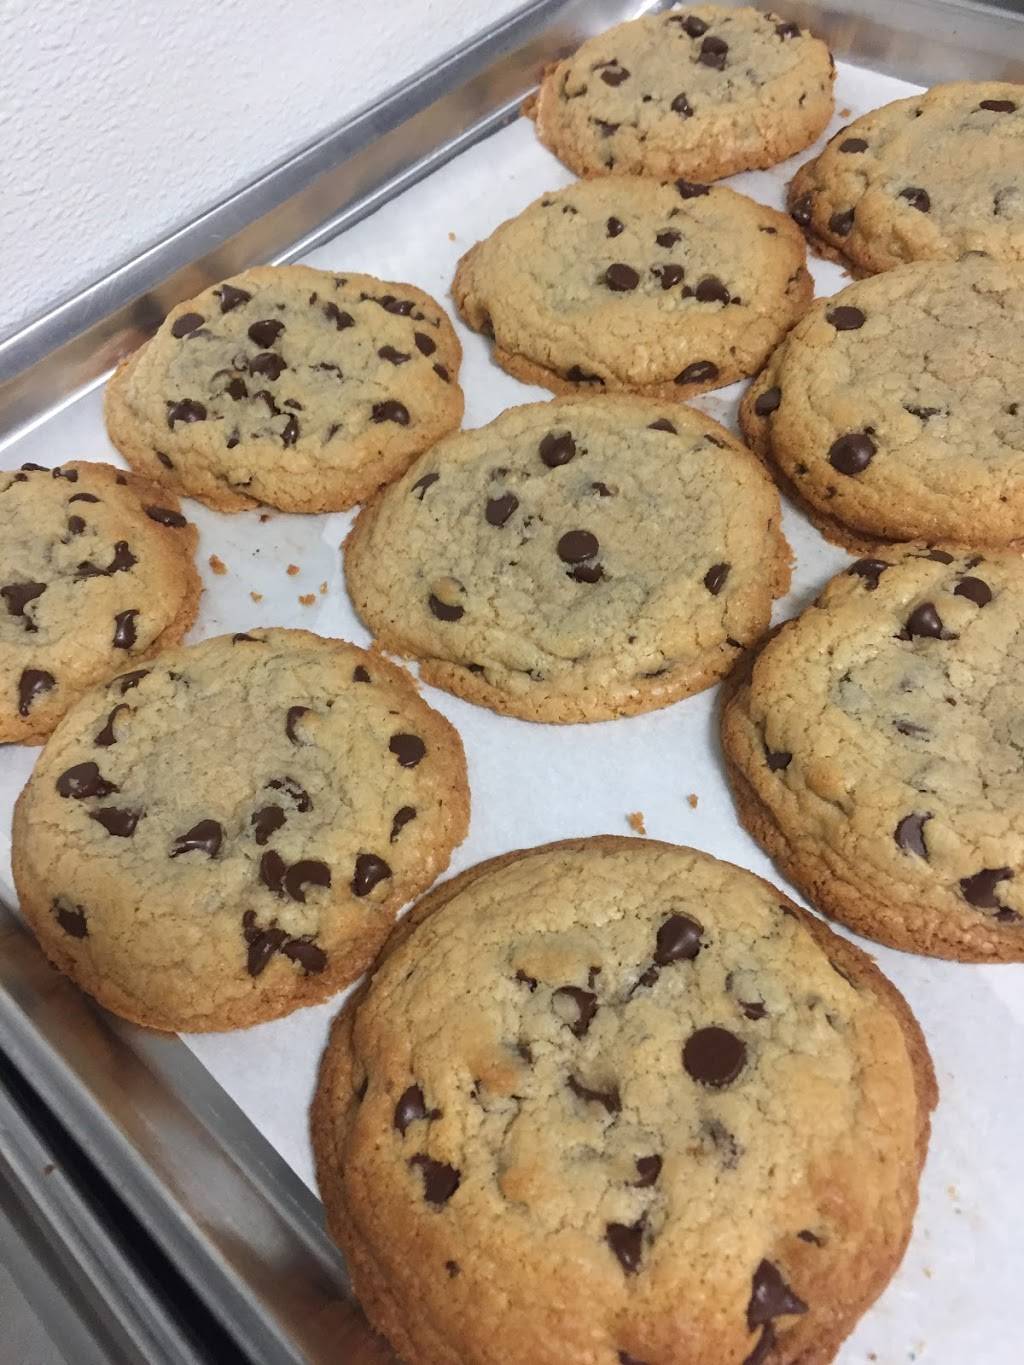 Winfield’s cookies and more | 8120 Lakeview Pkwy #200, Rowlett, TX 75088, United States | Phone: (972) 800-7366